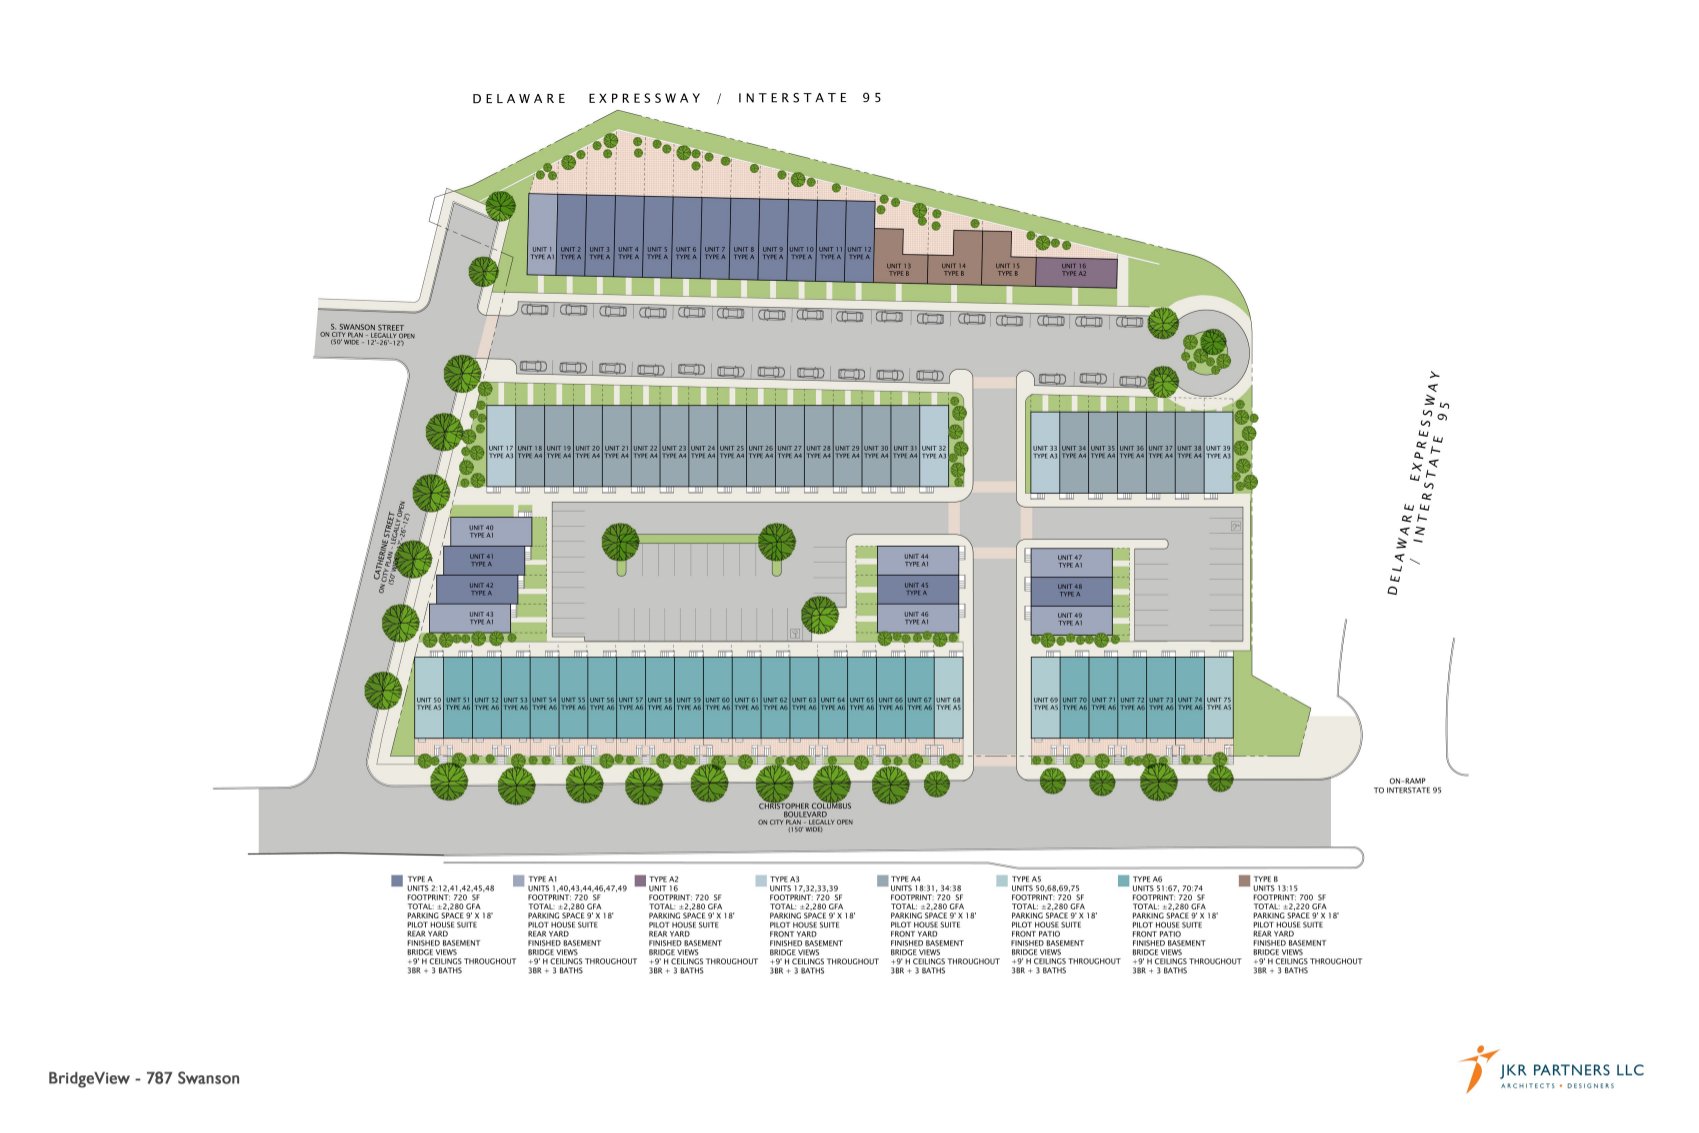 Site plan by and image courtesy of JKR Partners